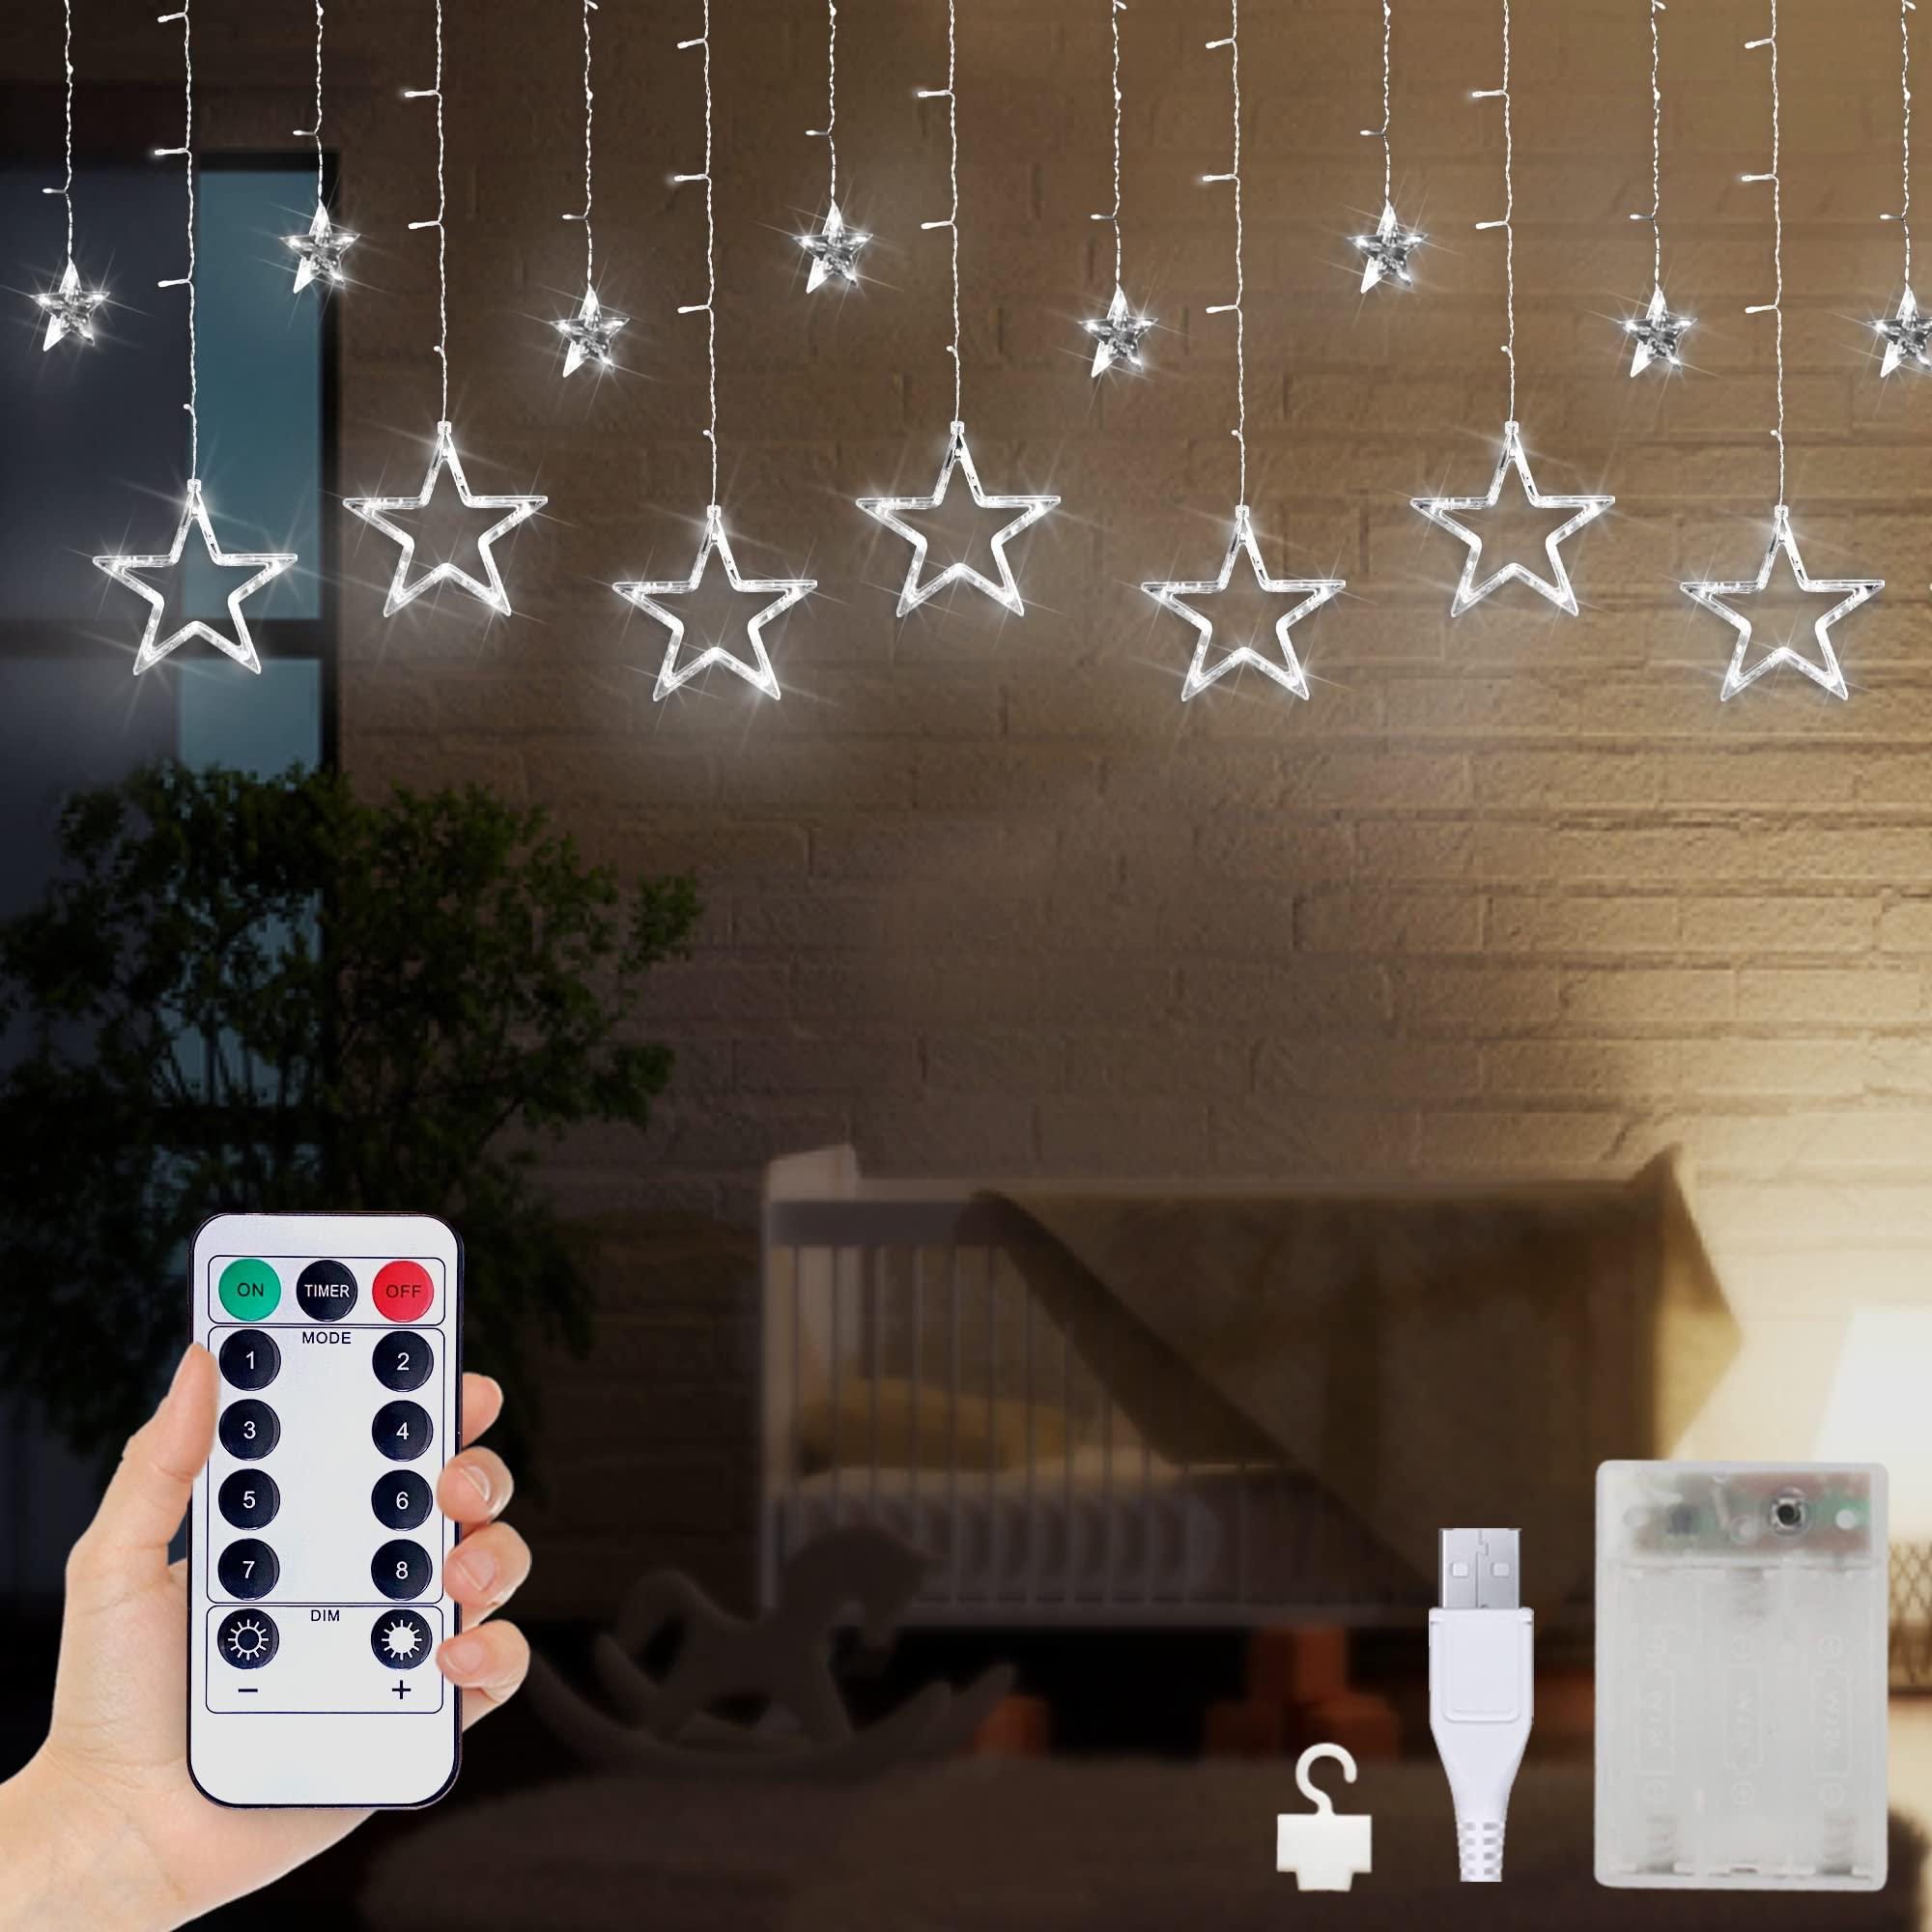 12 Star Curtain Lights with Remote Control 138 LEDs Fairy Light 8 Lighting Modes USB Powered for Bedroom Garden Party Wedding Christmas, Ideale Gift for Family Friends (RGB) 1